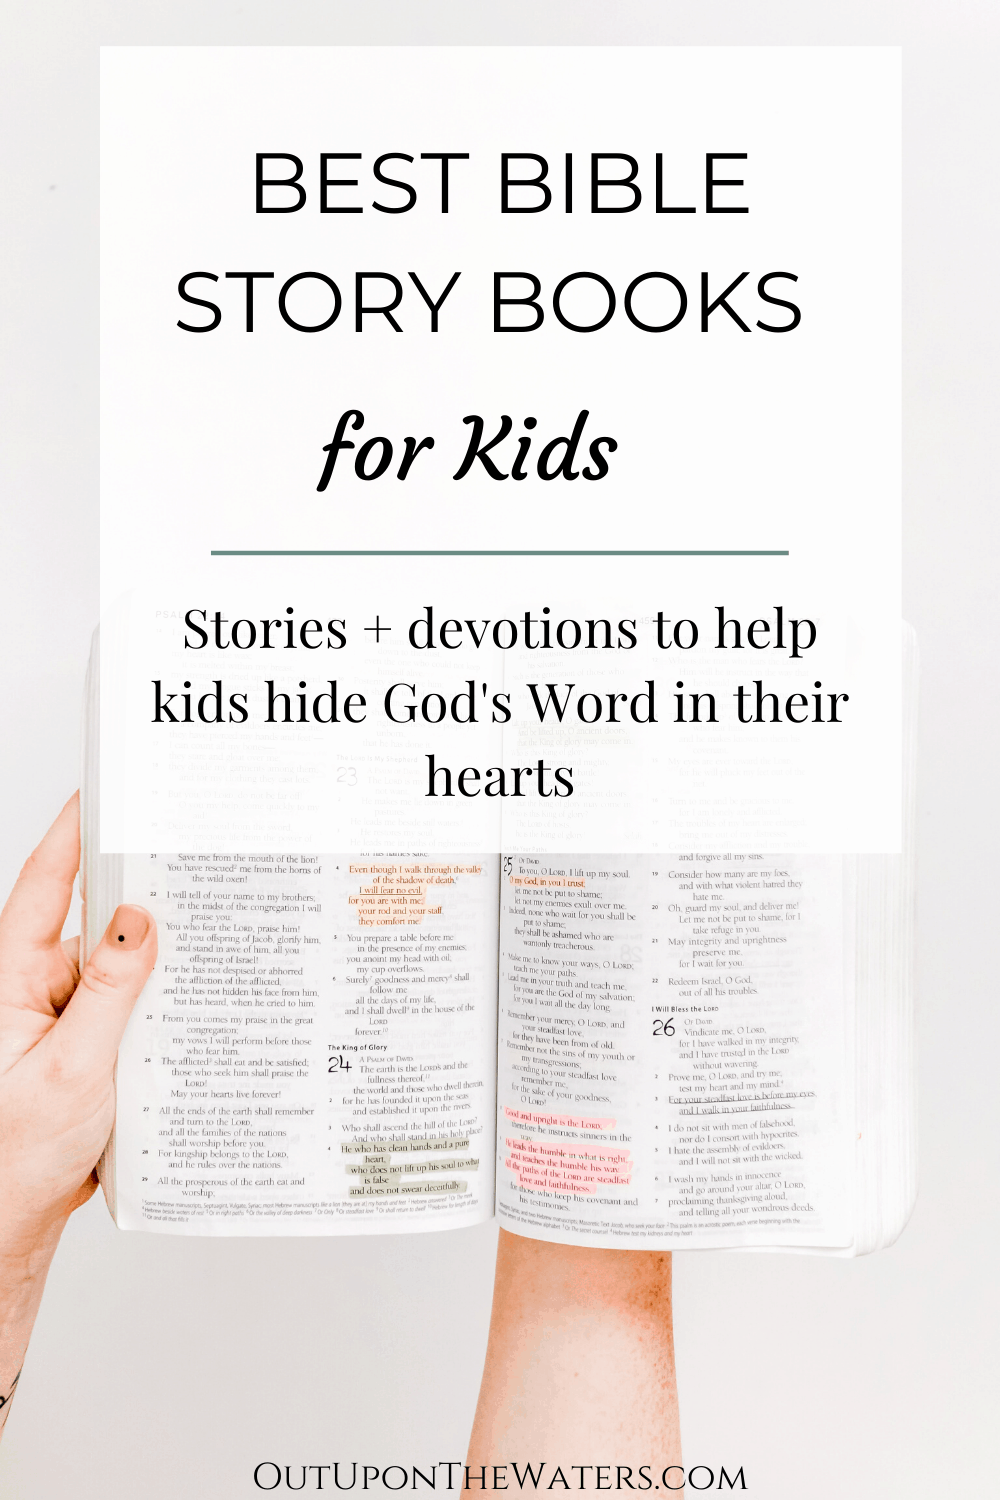 Best Bible Story Books for Kids